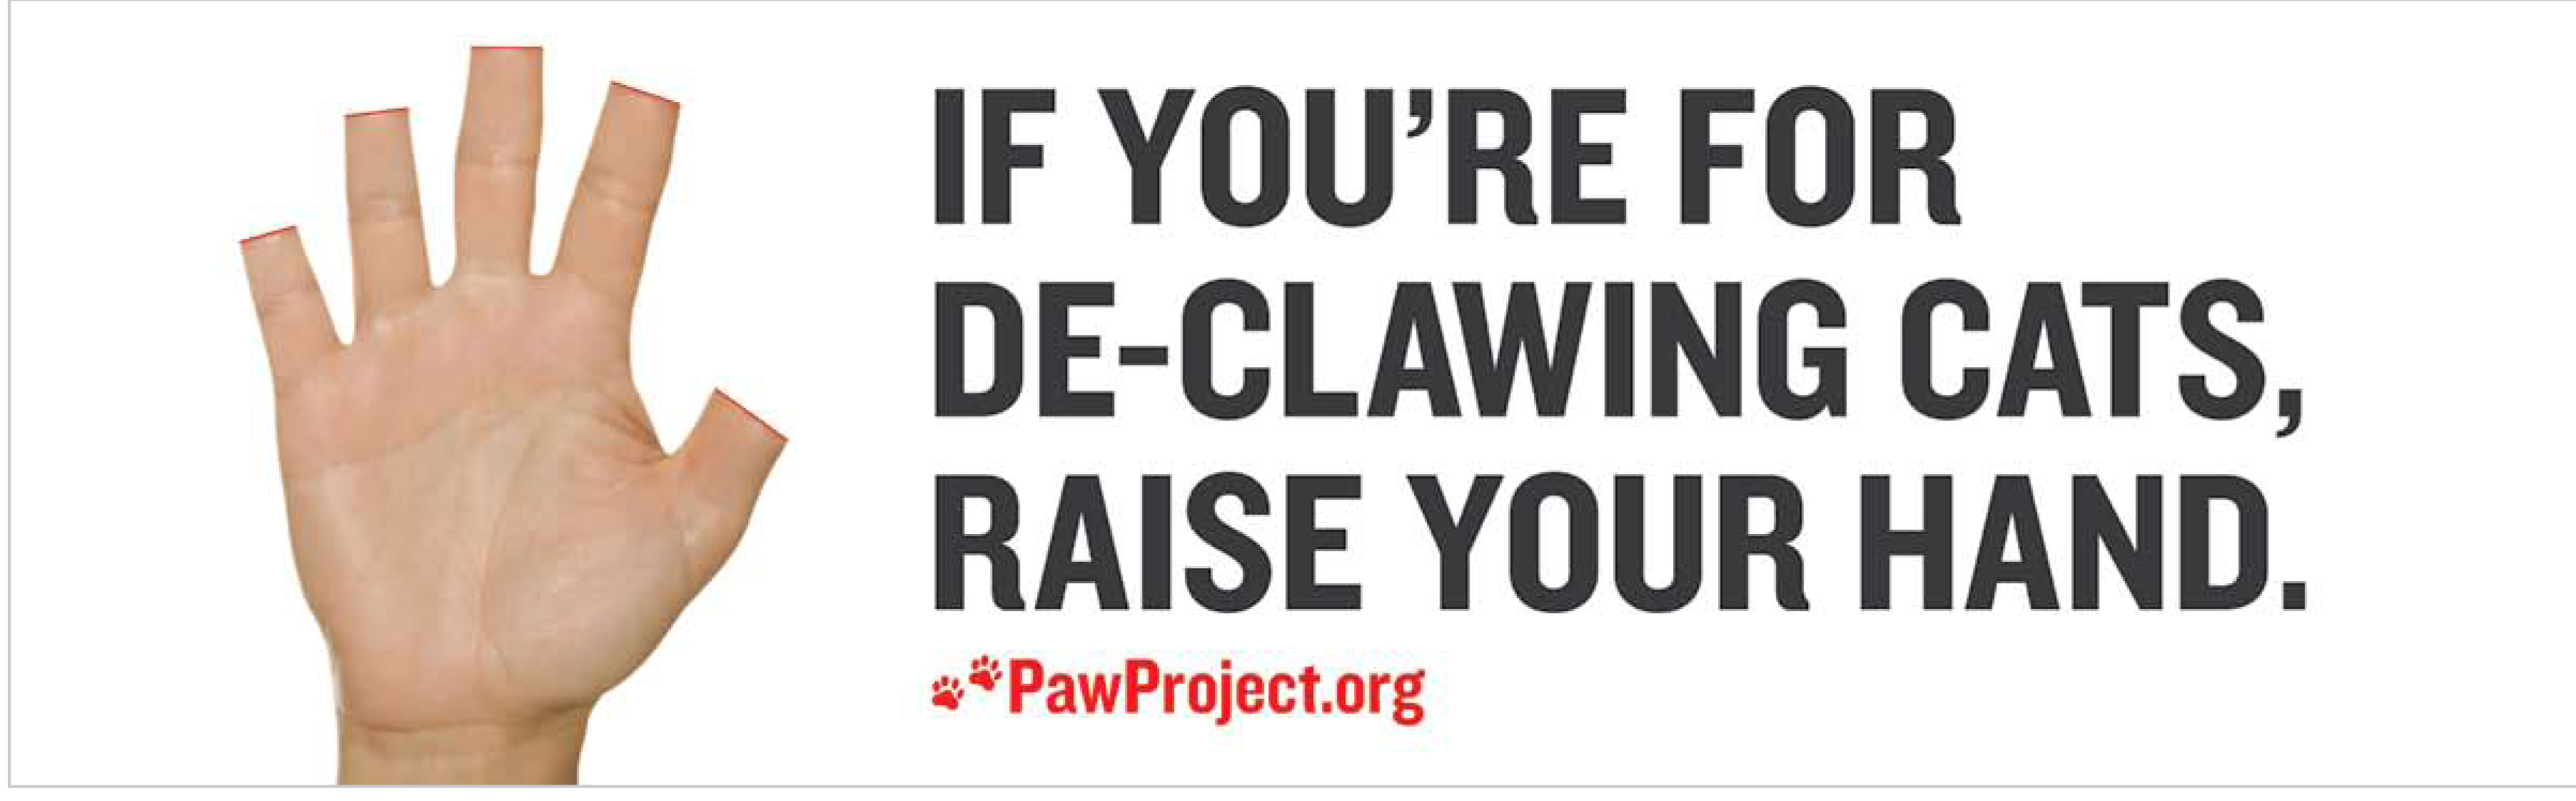 Show your support to anti-declawing with this bumper sticker!